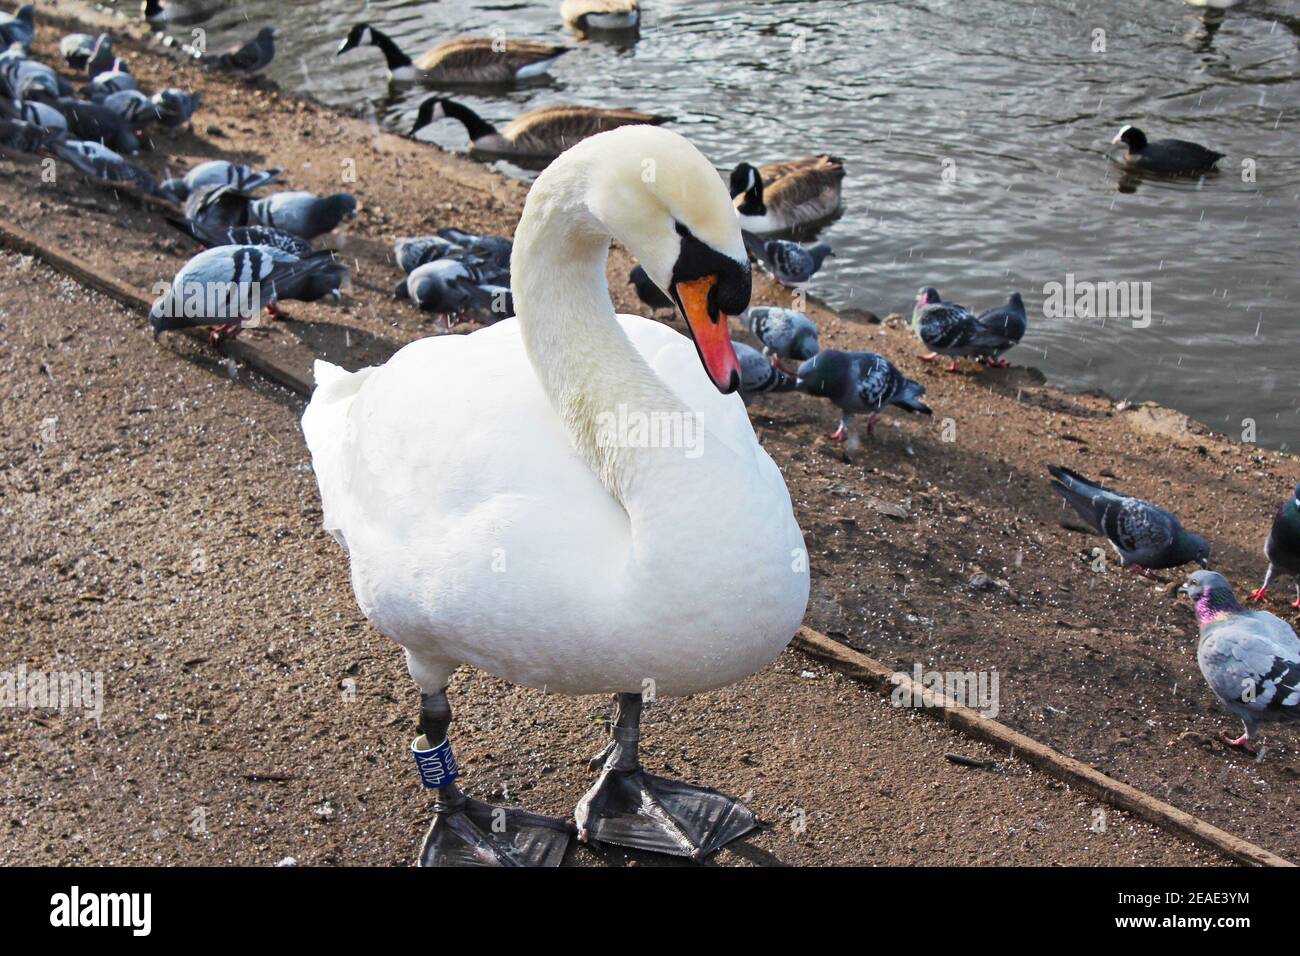 Close up of a white swan with a red beak standing next to a lake with lots of pigeons and geese in Alexandra Park, Manchester, England Stock Photo